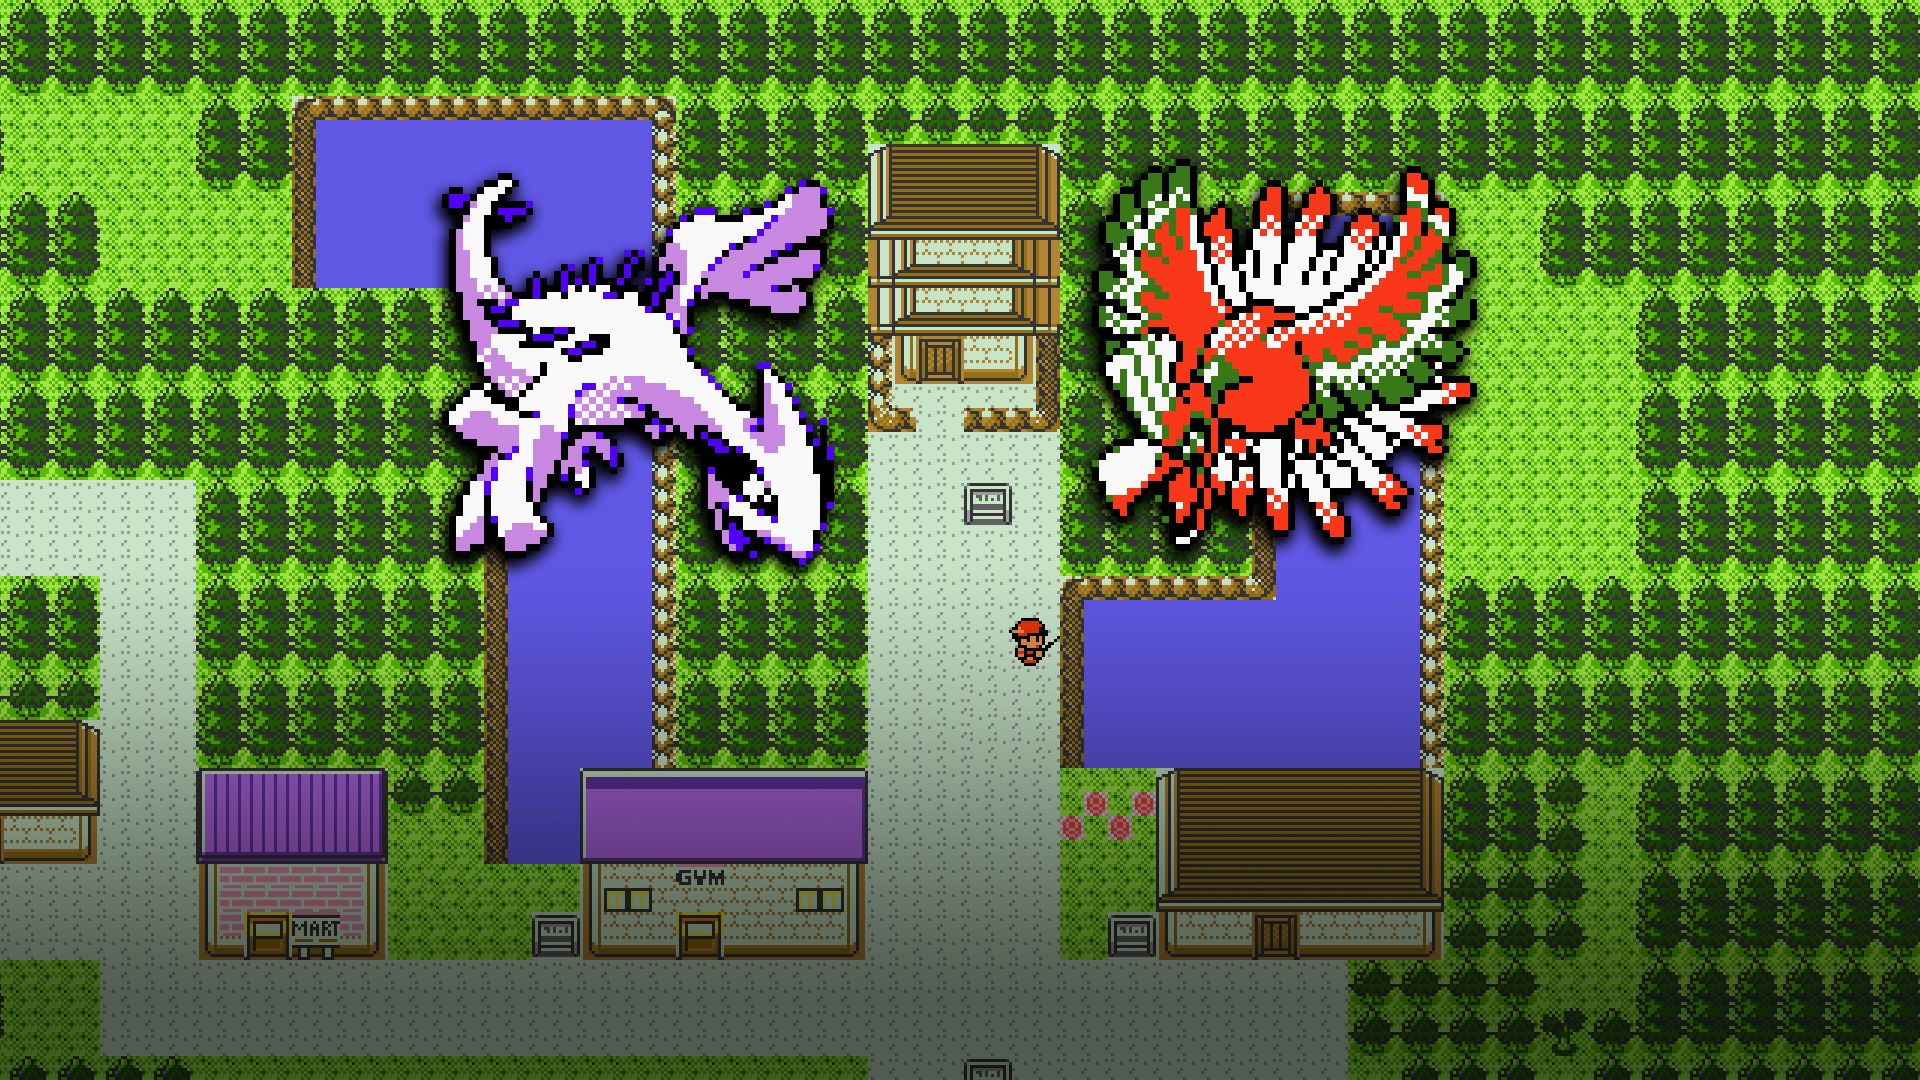 25 Glaring Problems With Pokémon Gold And Silver Fans Won't Admit